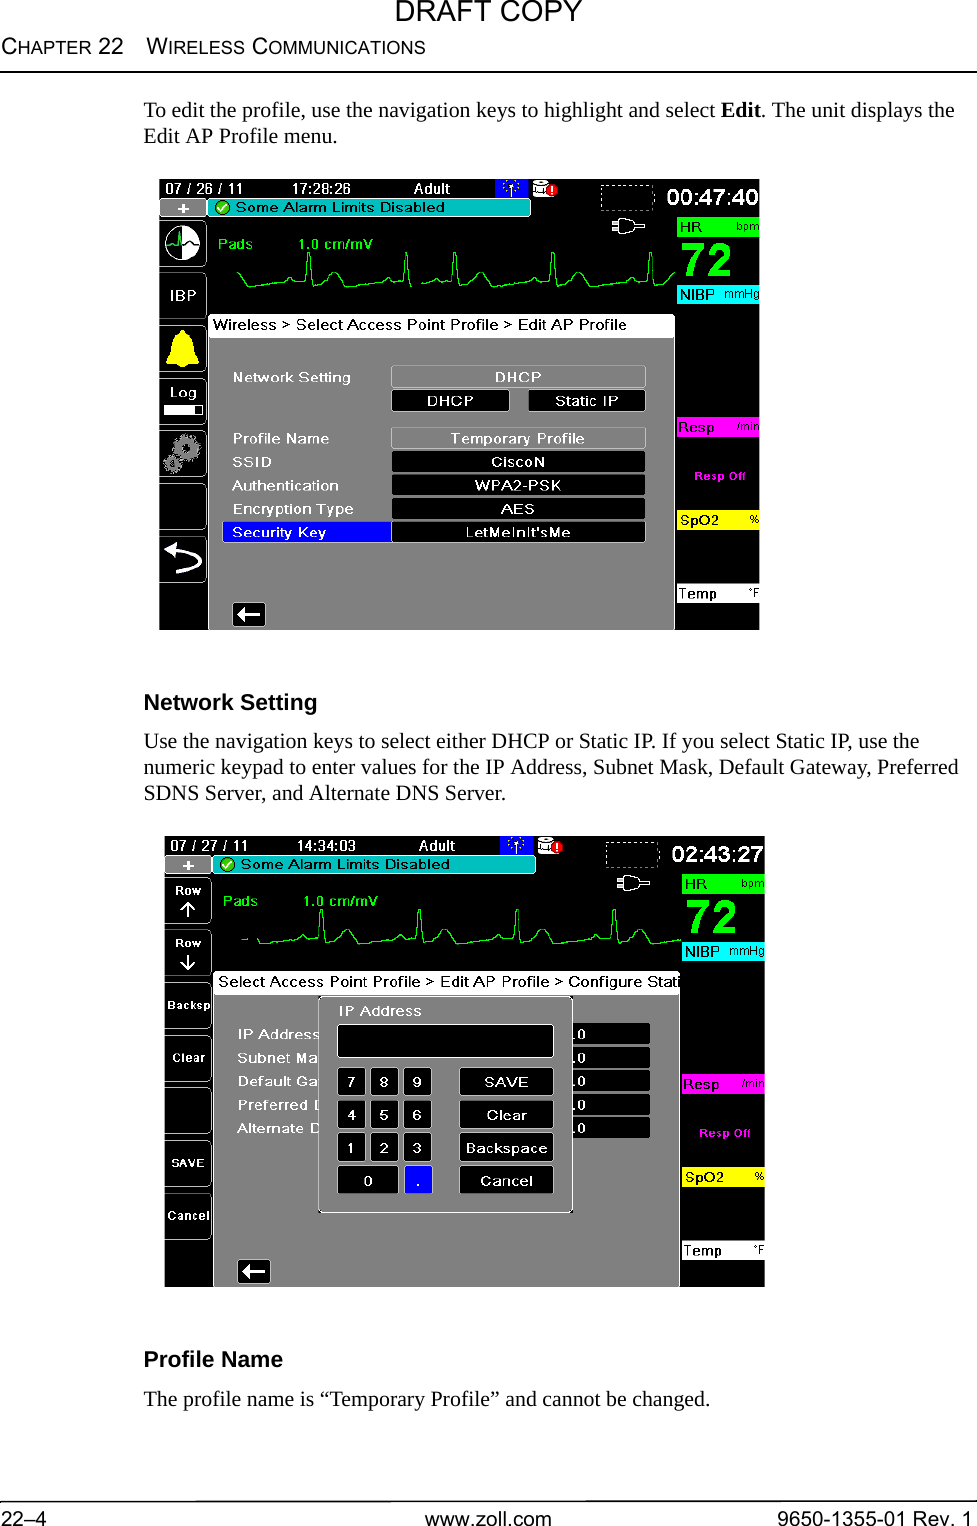 CHAPTER 22 WIRELESS COMMUNICATIONS22–4 www.zoll.com 9650-1355-01 Rev. 1To edit the profile, use the navigation keys to highlight and select Edit. The unit displays the Edit AP Profile menu.Network SettingUse the navigation keys to select either DHCP or Static IP. If you select Static IP, use the numeric keypad to enter values for the IP Address, Subnet Mask, Default Gateway, Preferred SDNS Server, and Alternate DNS Server.Profile NameThe profile name is “Temporary Profile” and cannot be changed.DRAFT COPY